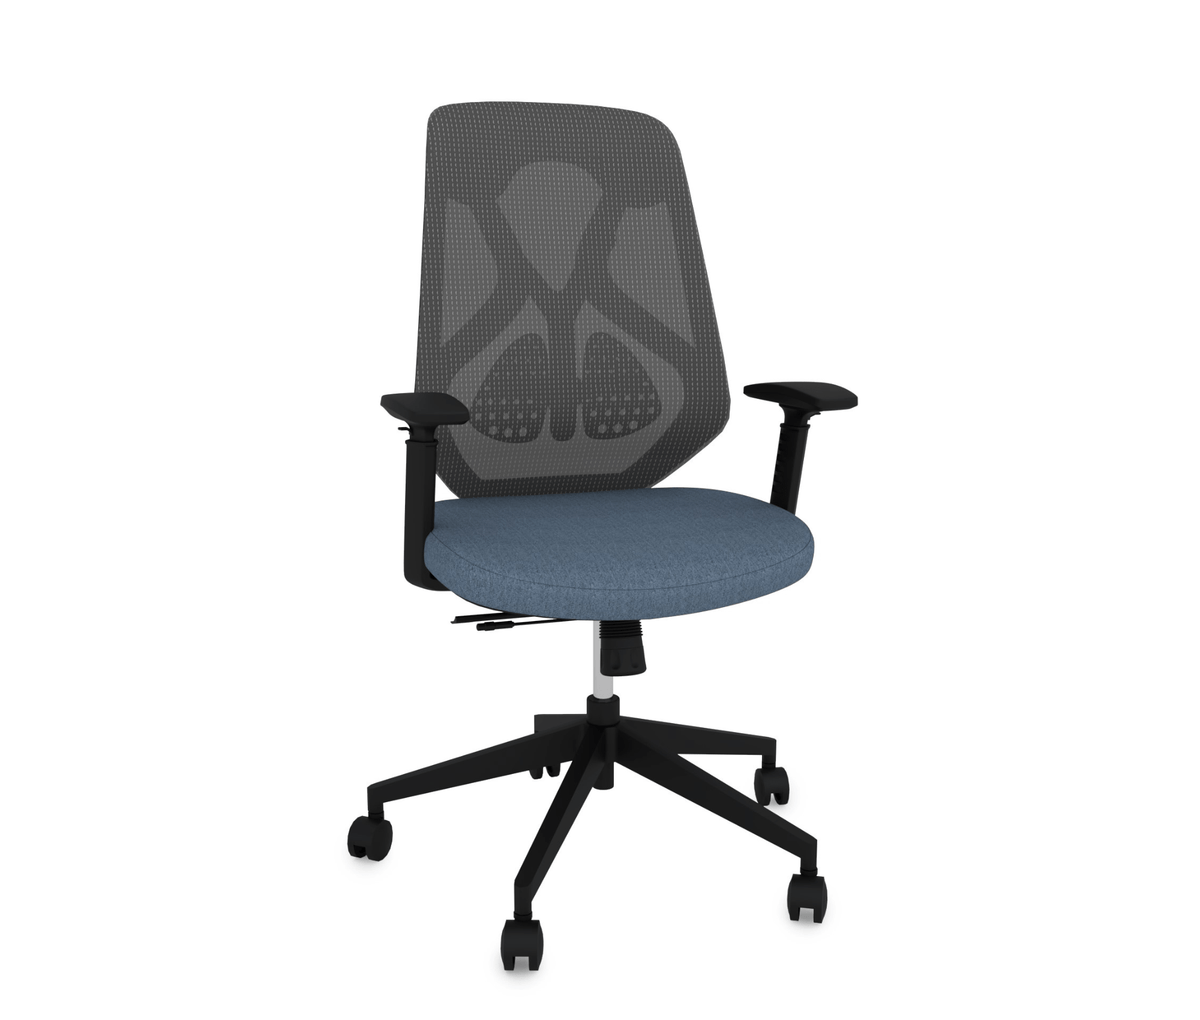 Ergonomic Chair w/ Adjustable Arms Porvata Office Chairs